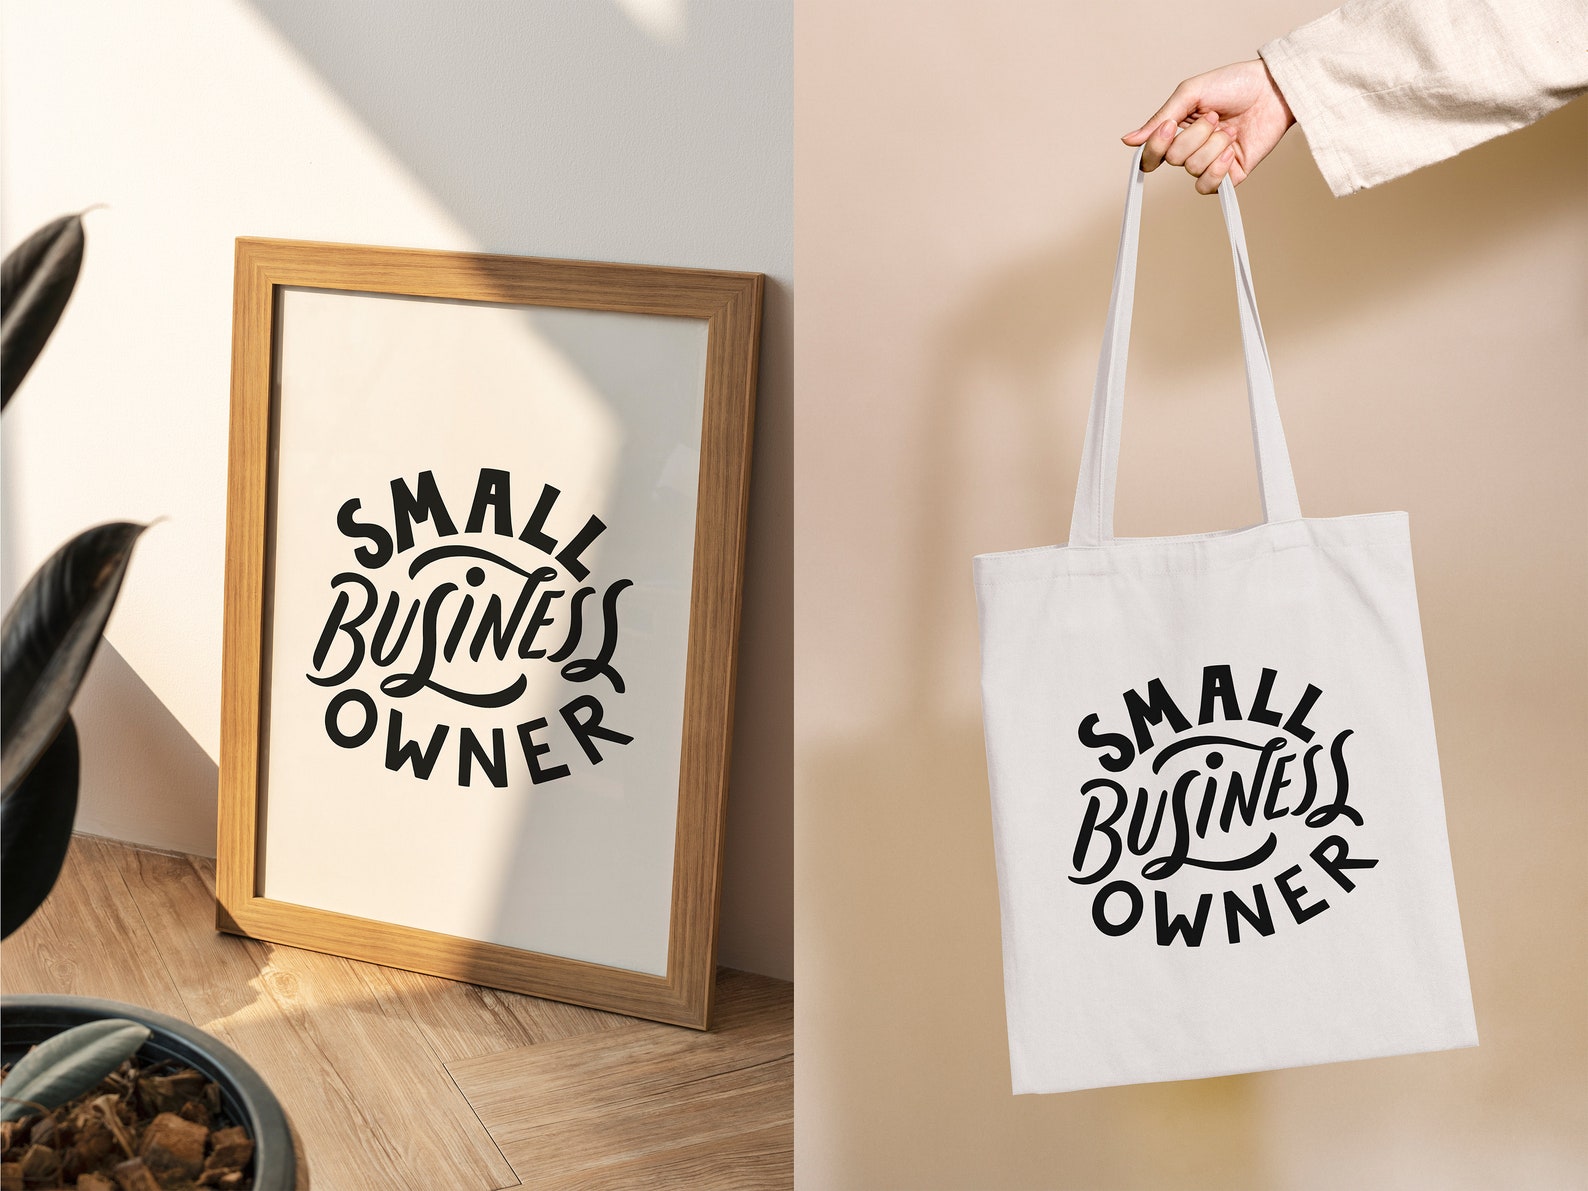 Small business owner SVG Png. File for cricut. Support